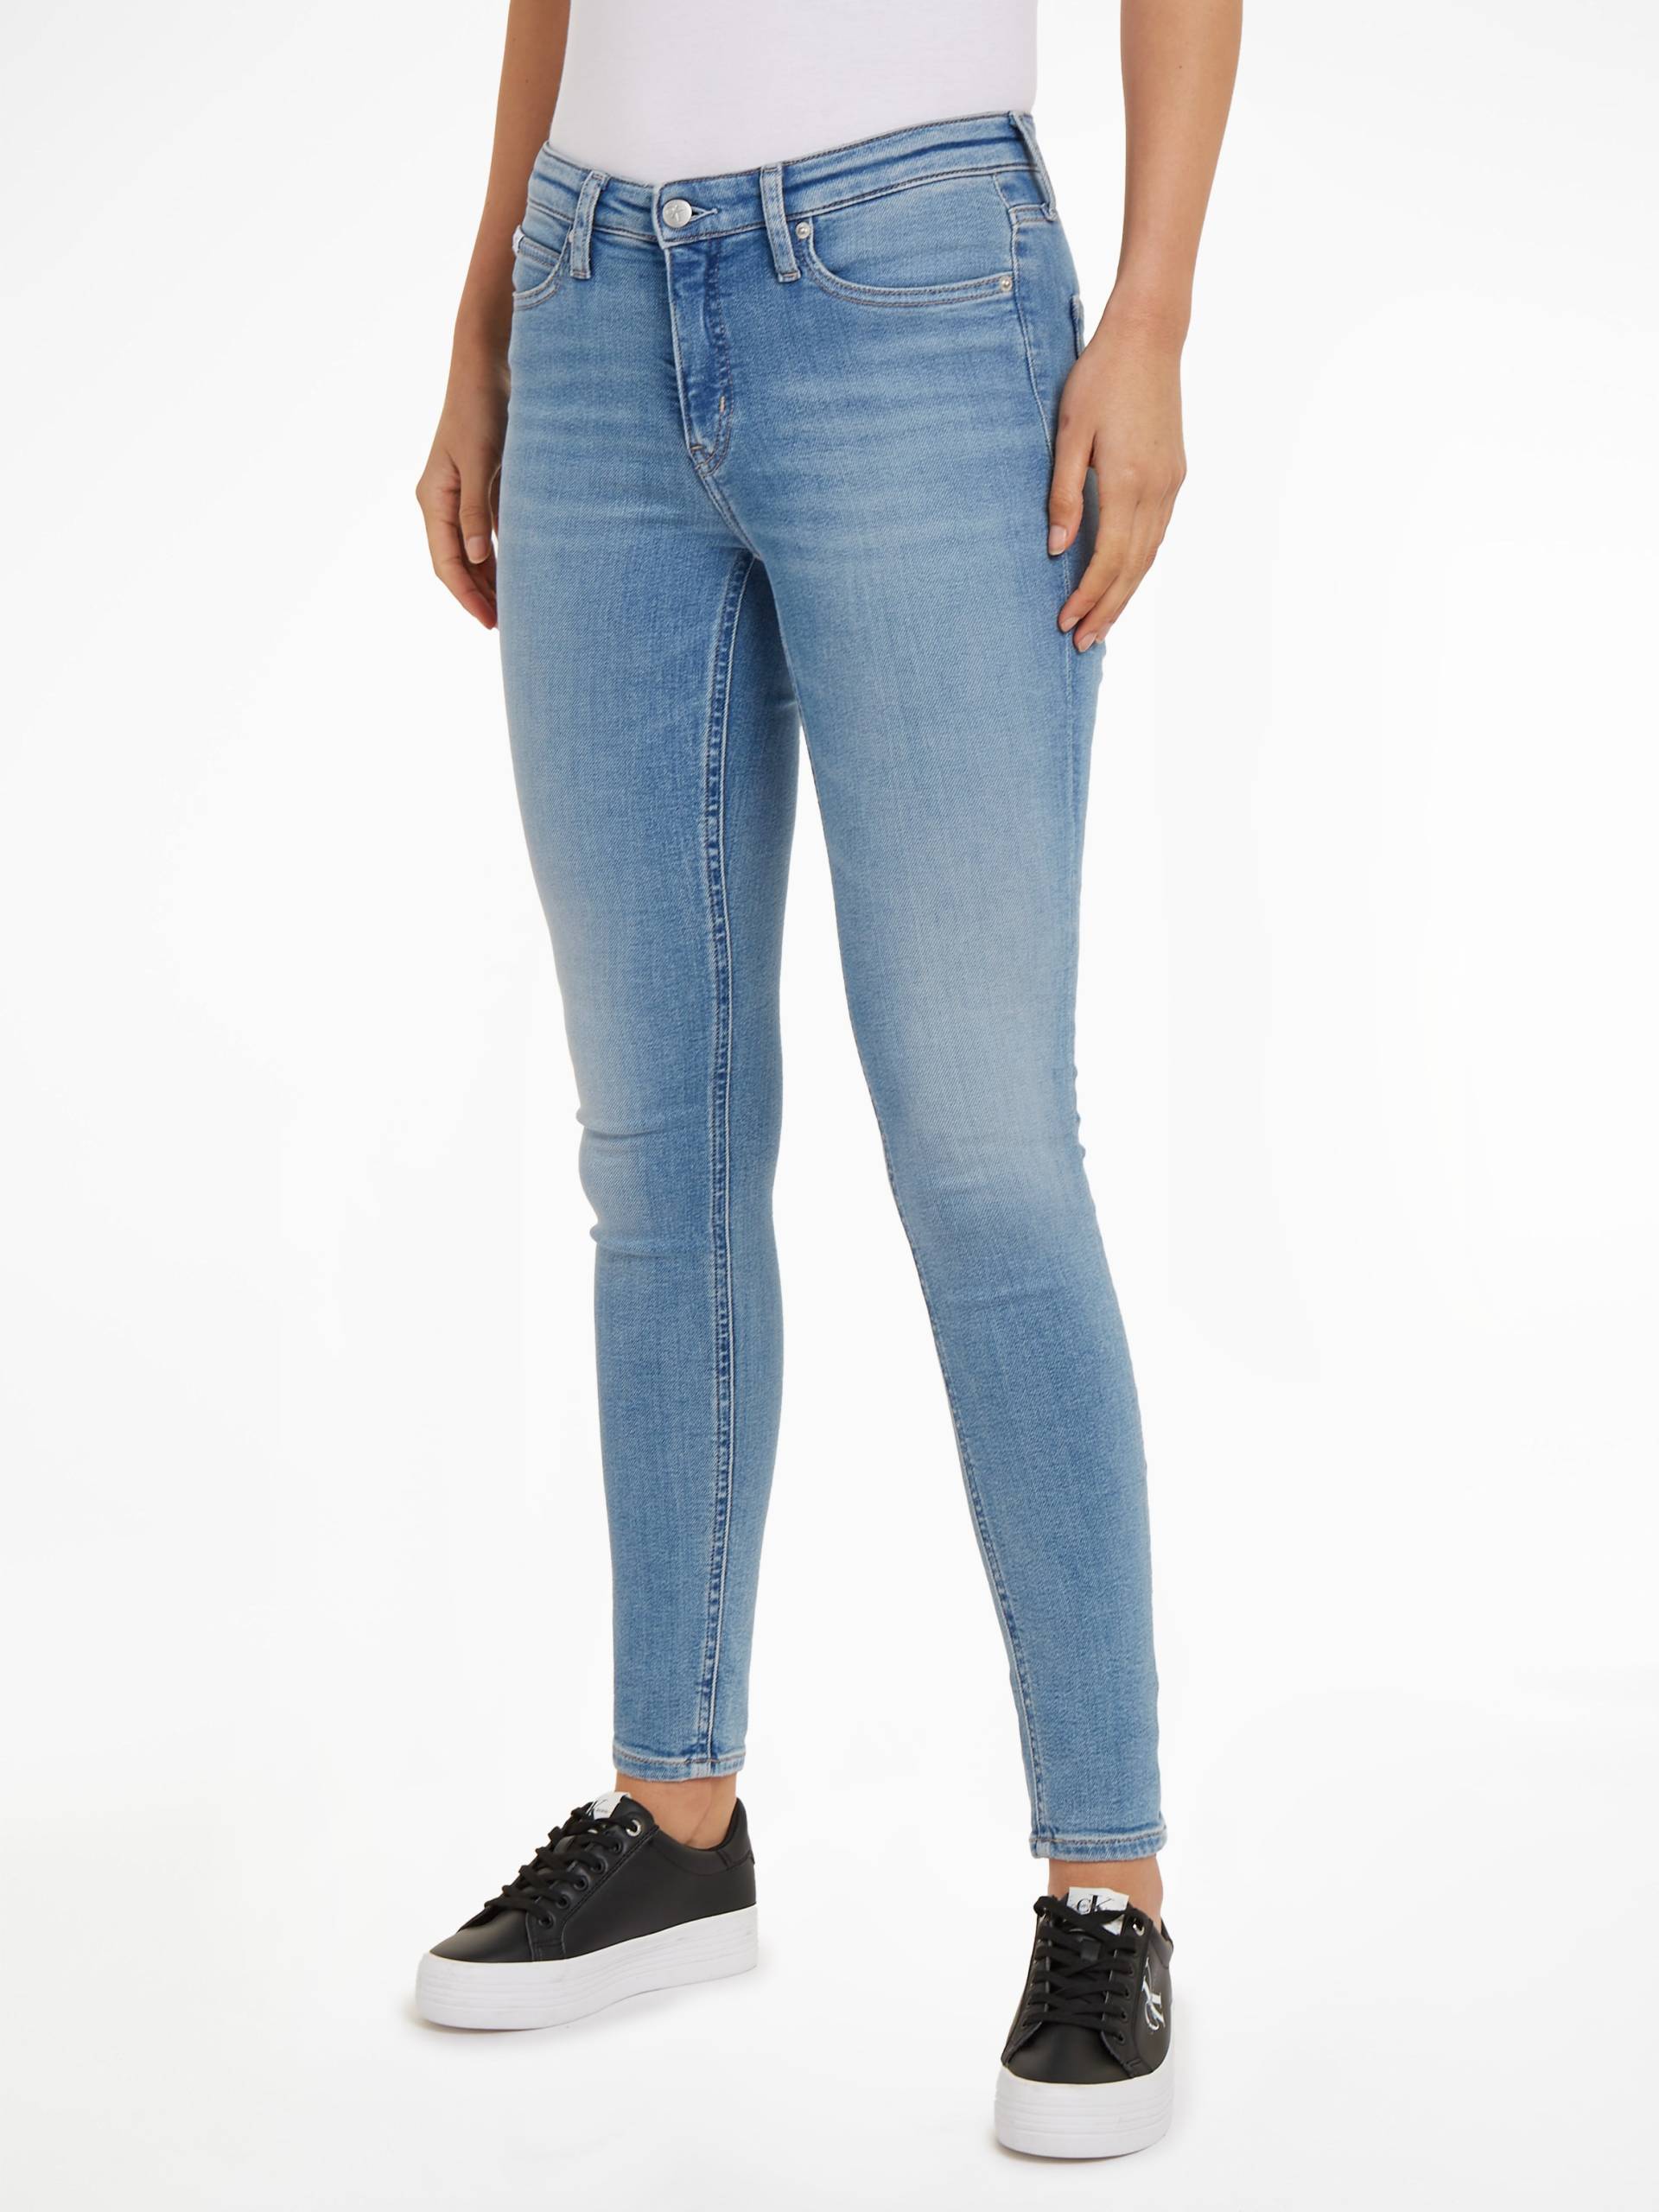 Calvin Klein Jeans Skinny-fit-Jeans »MID RISE SKINNY« von Calvin Klein Jeans